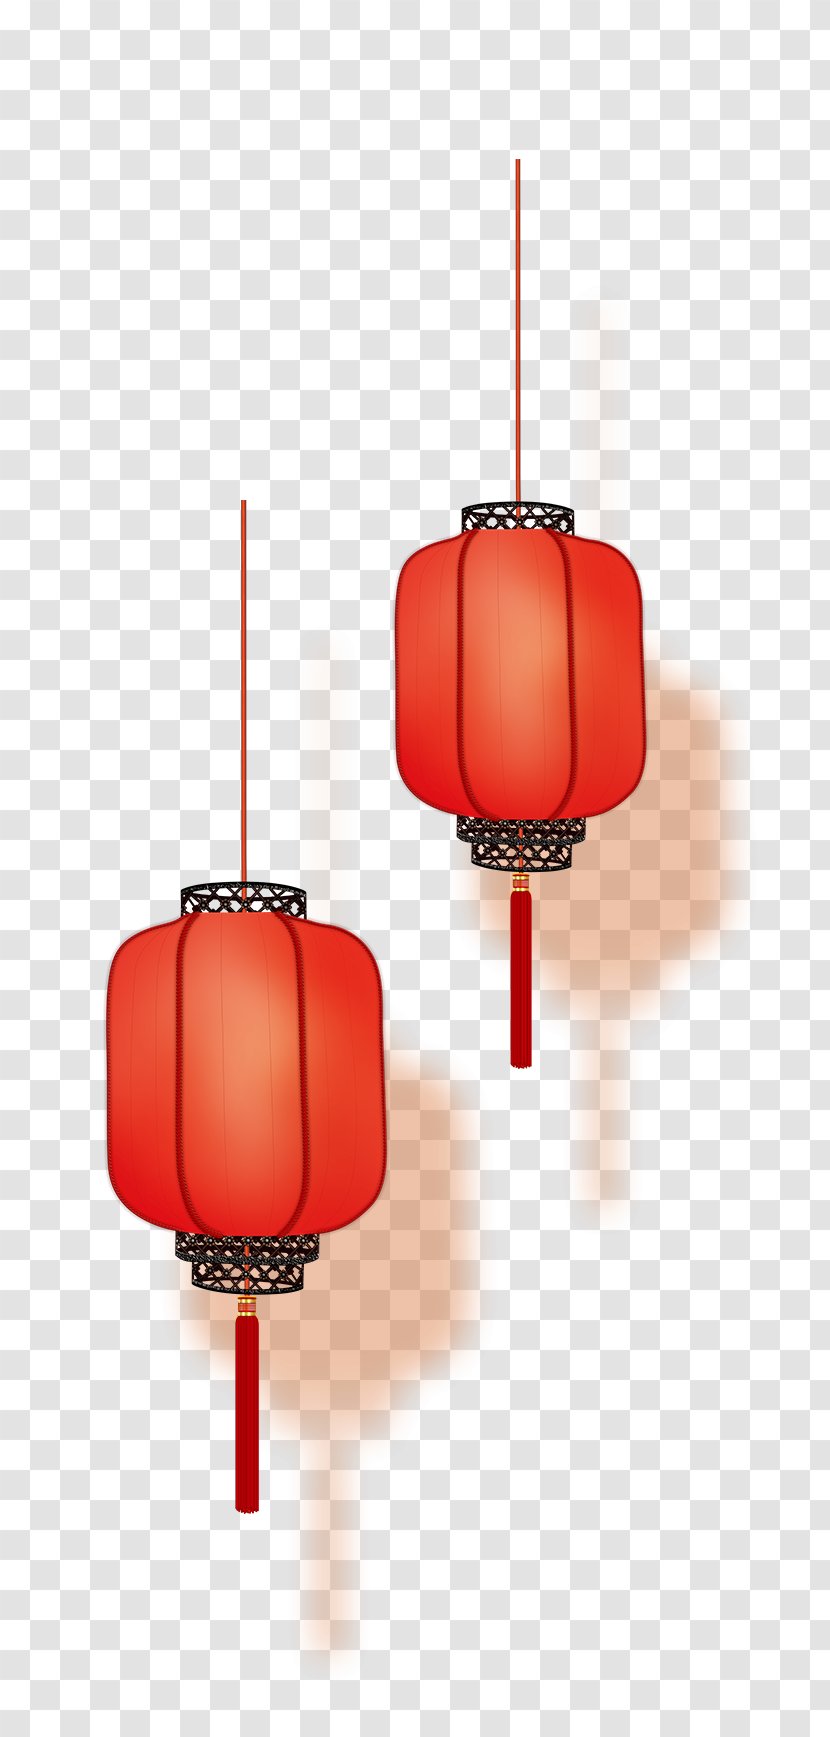 Lantern Festival Chinese New Year Clip Art Image - Light Fixture Transparent PNG